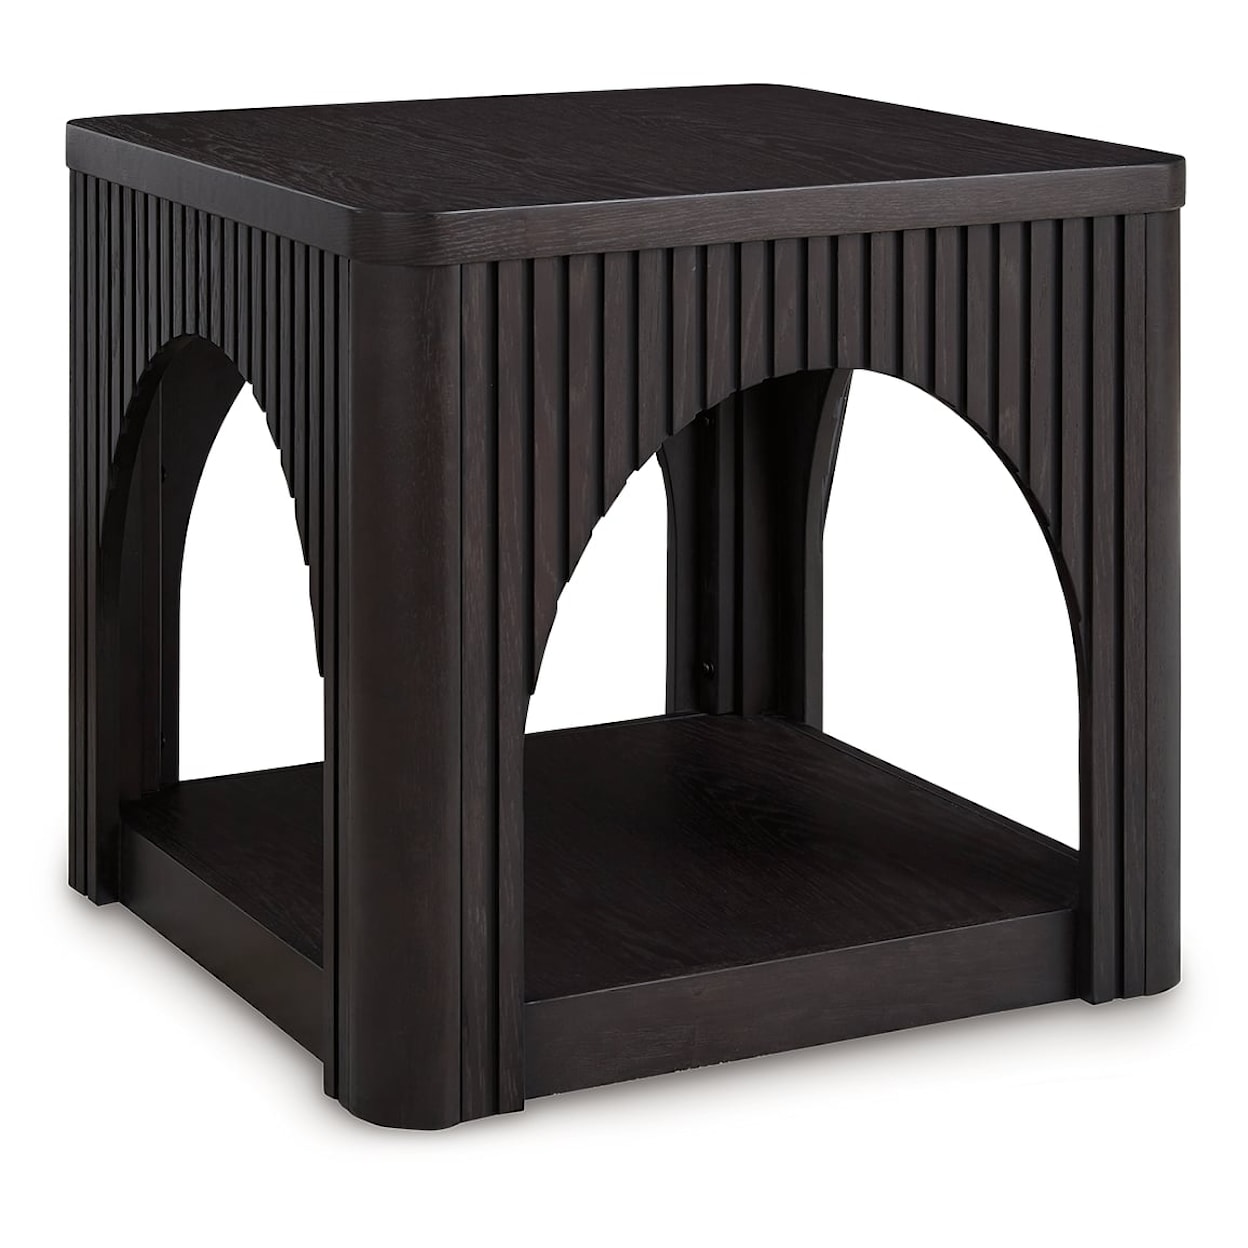 Benchcraft Yellink Square End Table